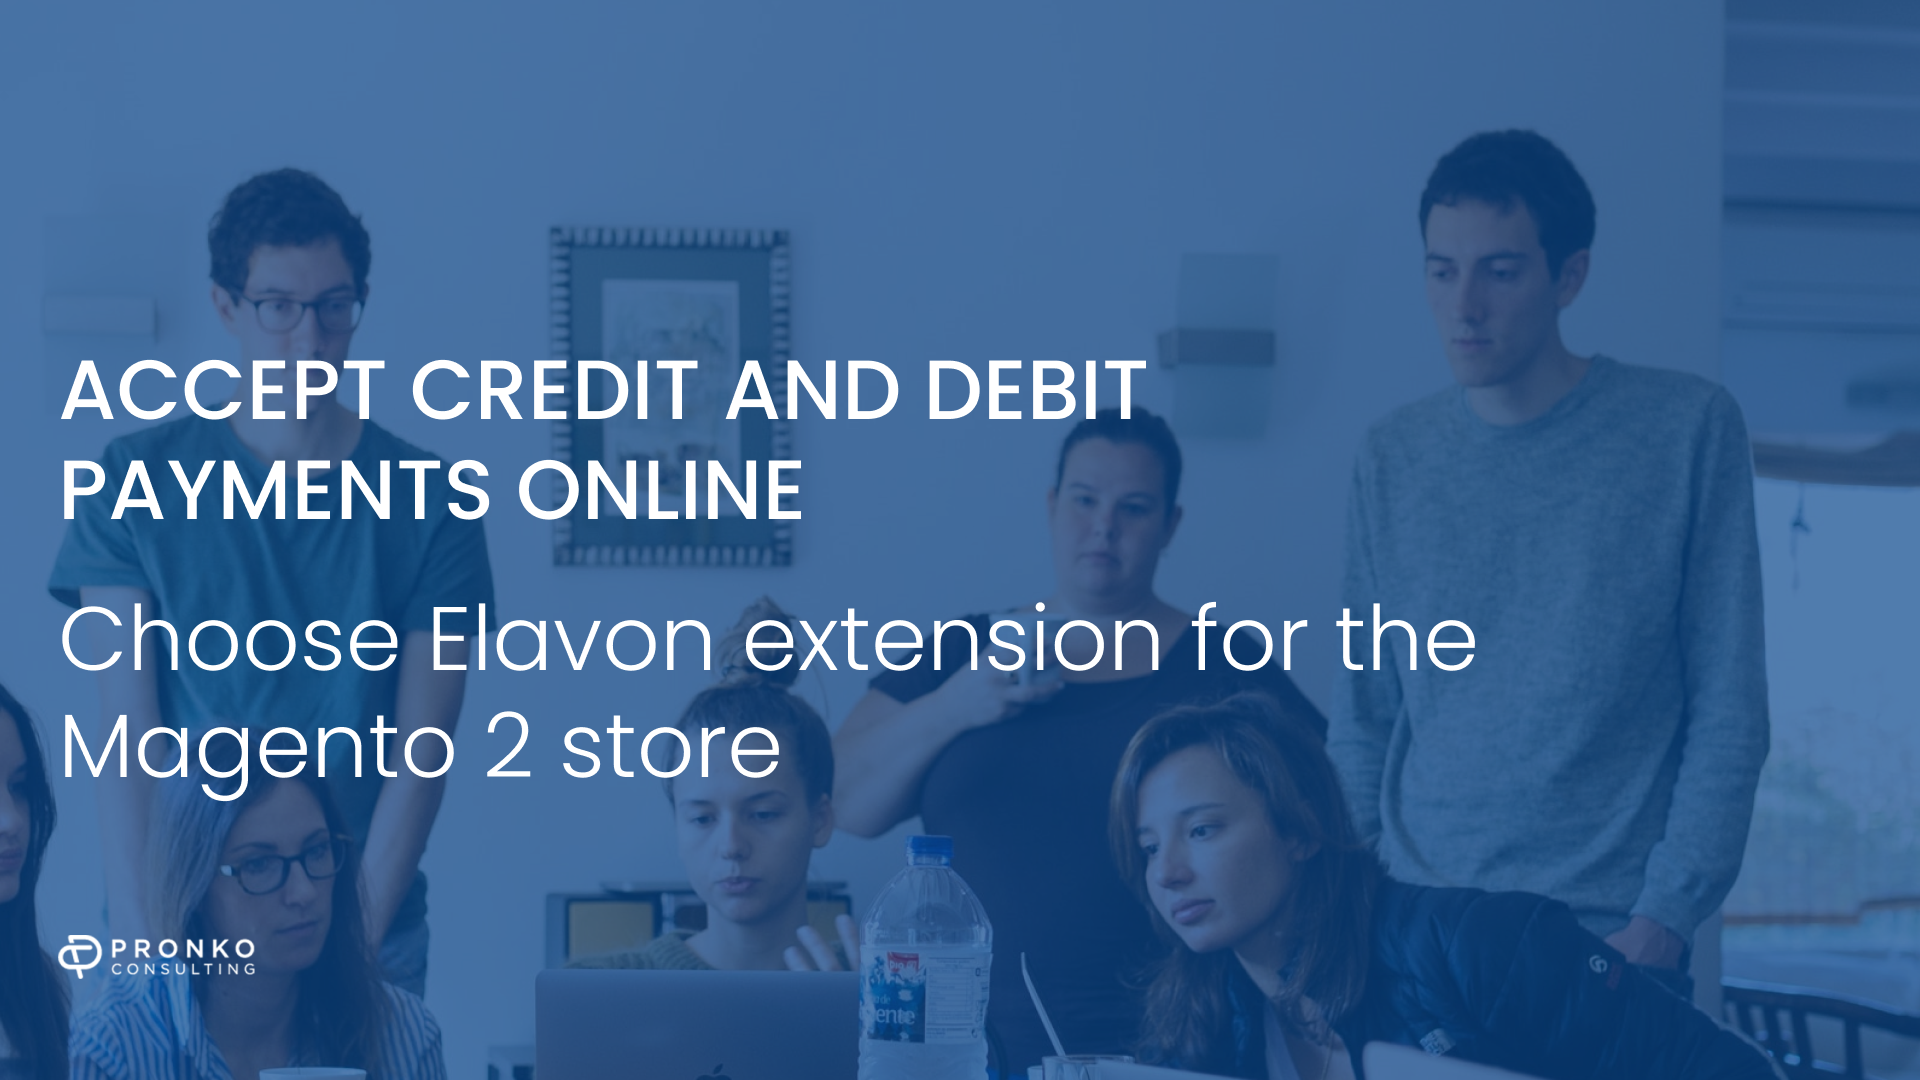 Elavon extension for the Magento 2 store